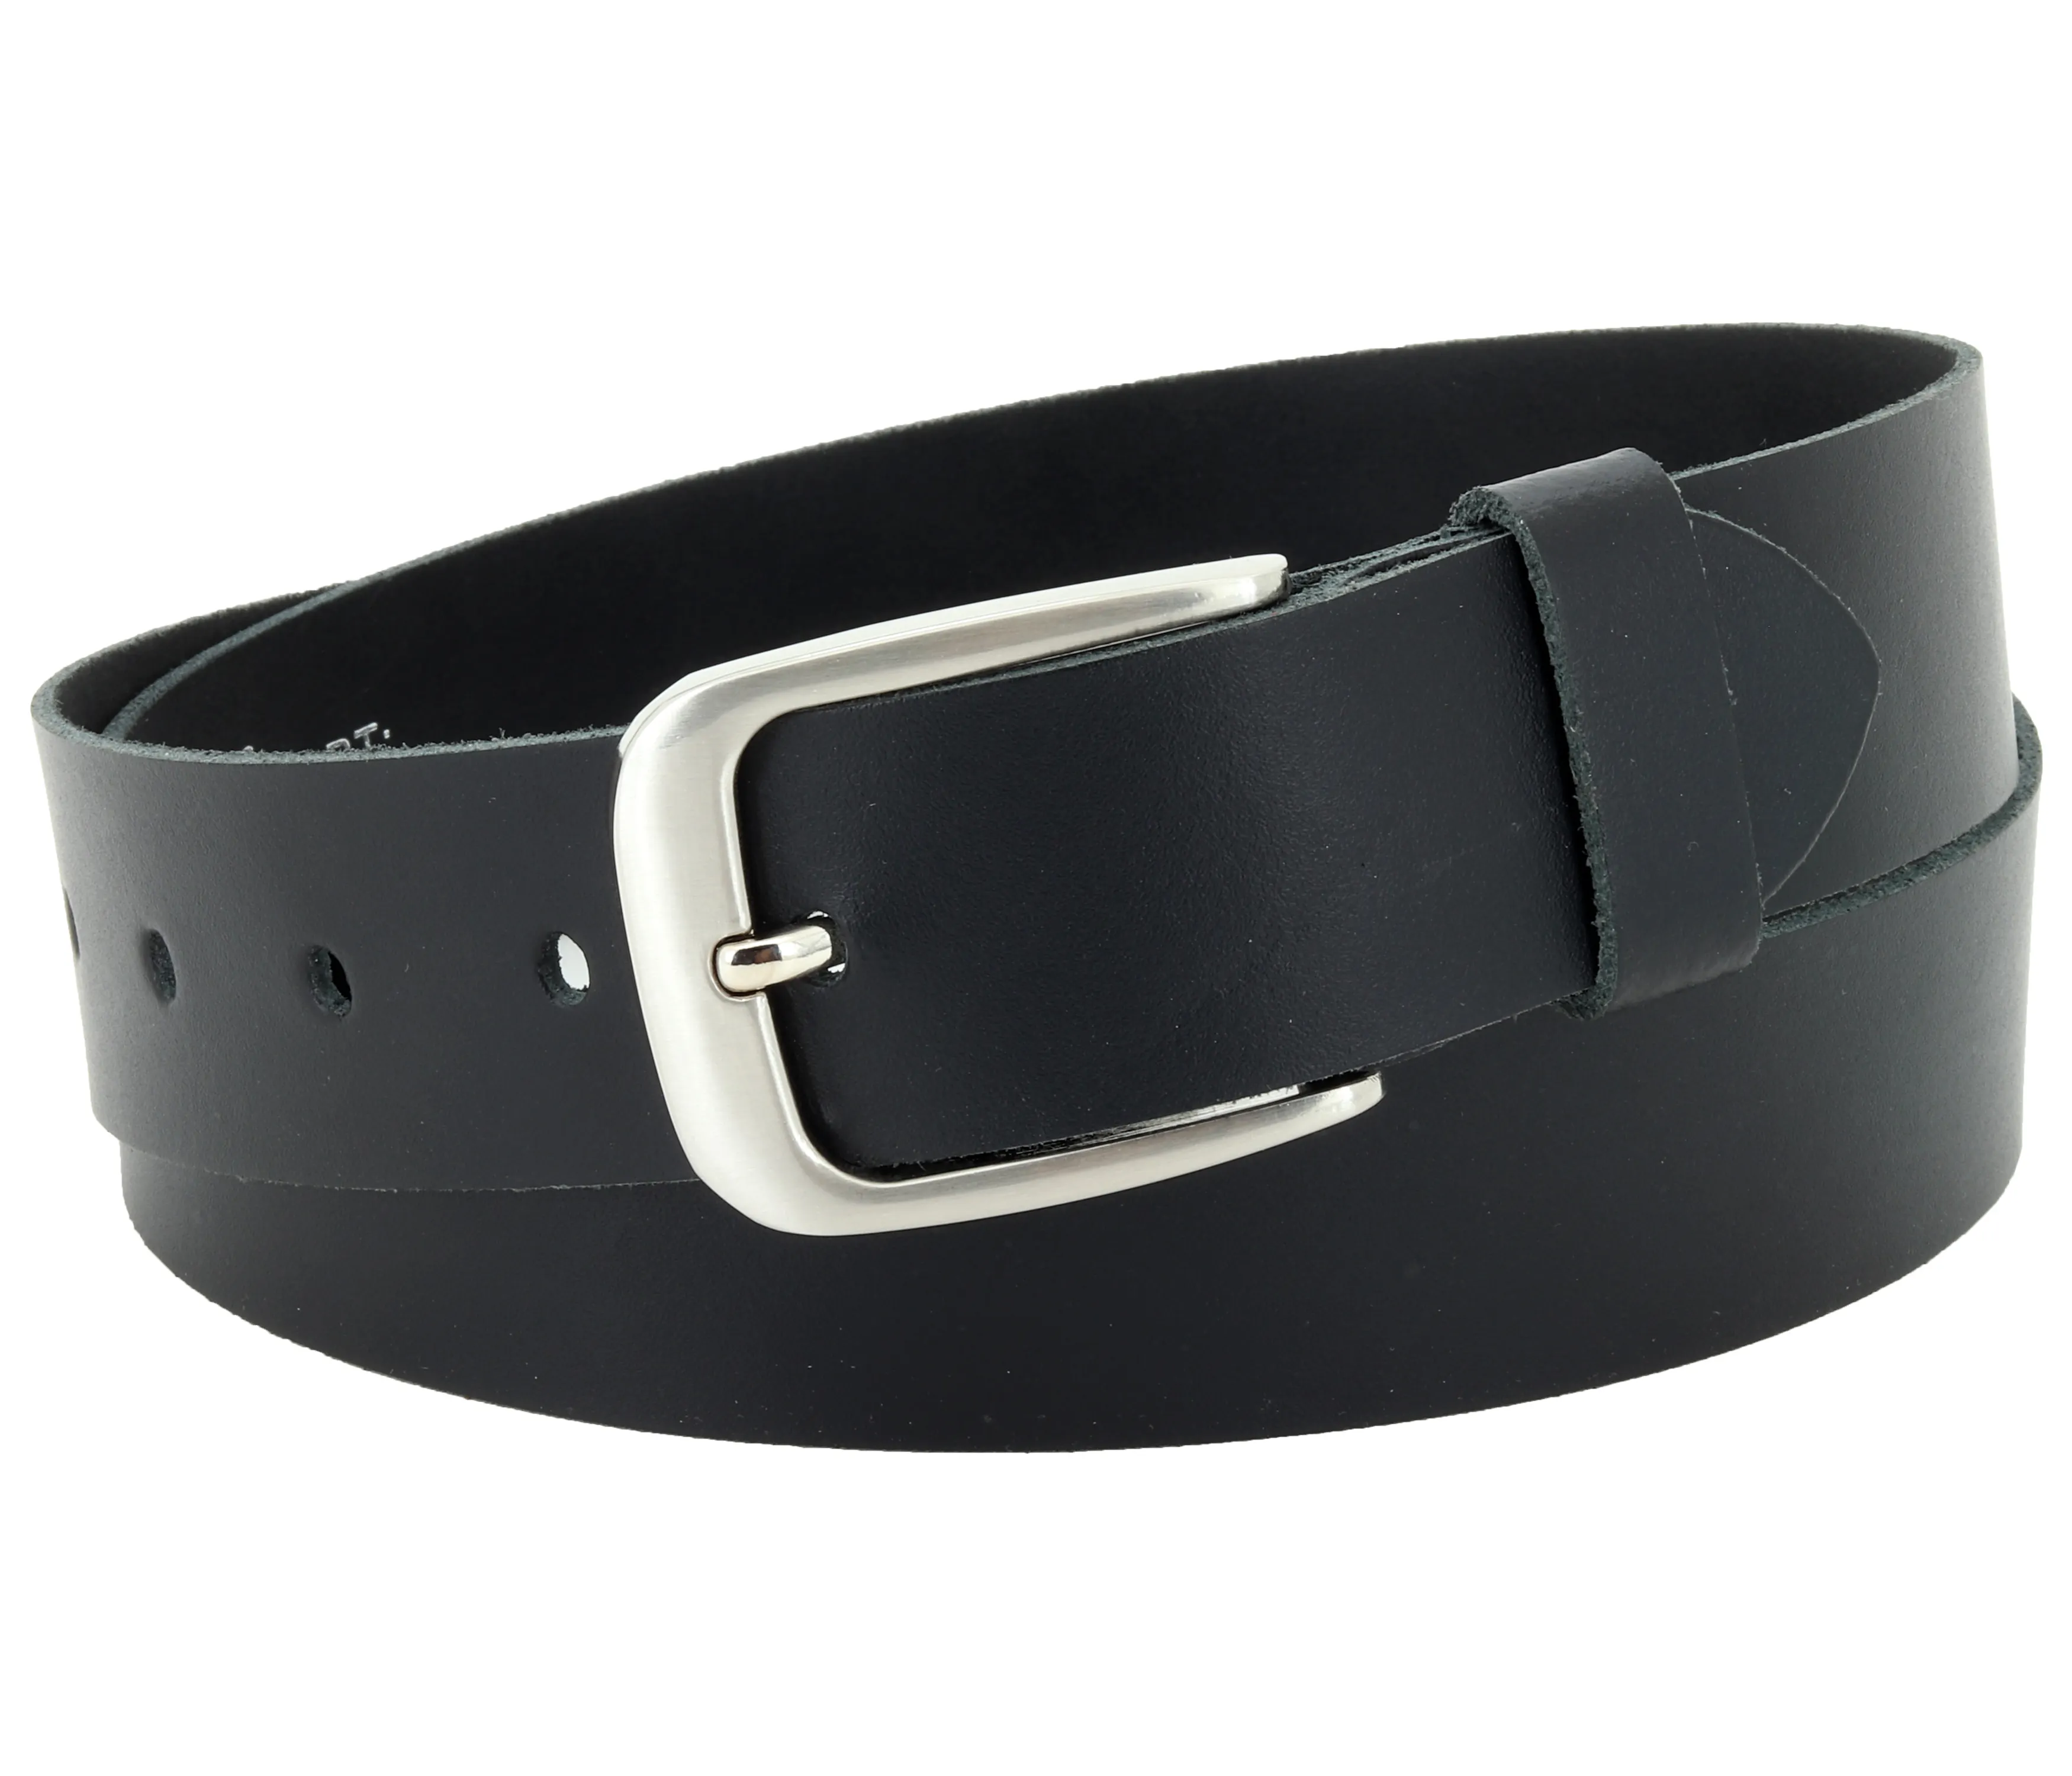 Fashion Styles Genuine Leather Belt With More Color Choices Elegant And Comfortable Belt Suitable For Men And Women